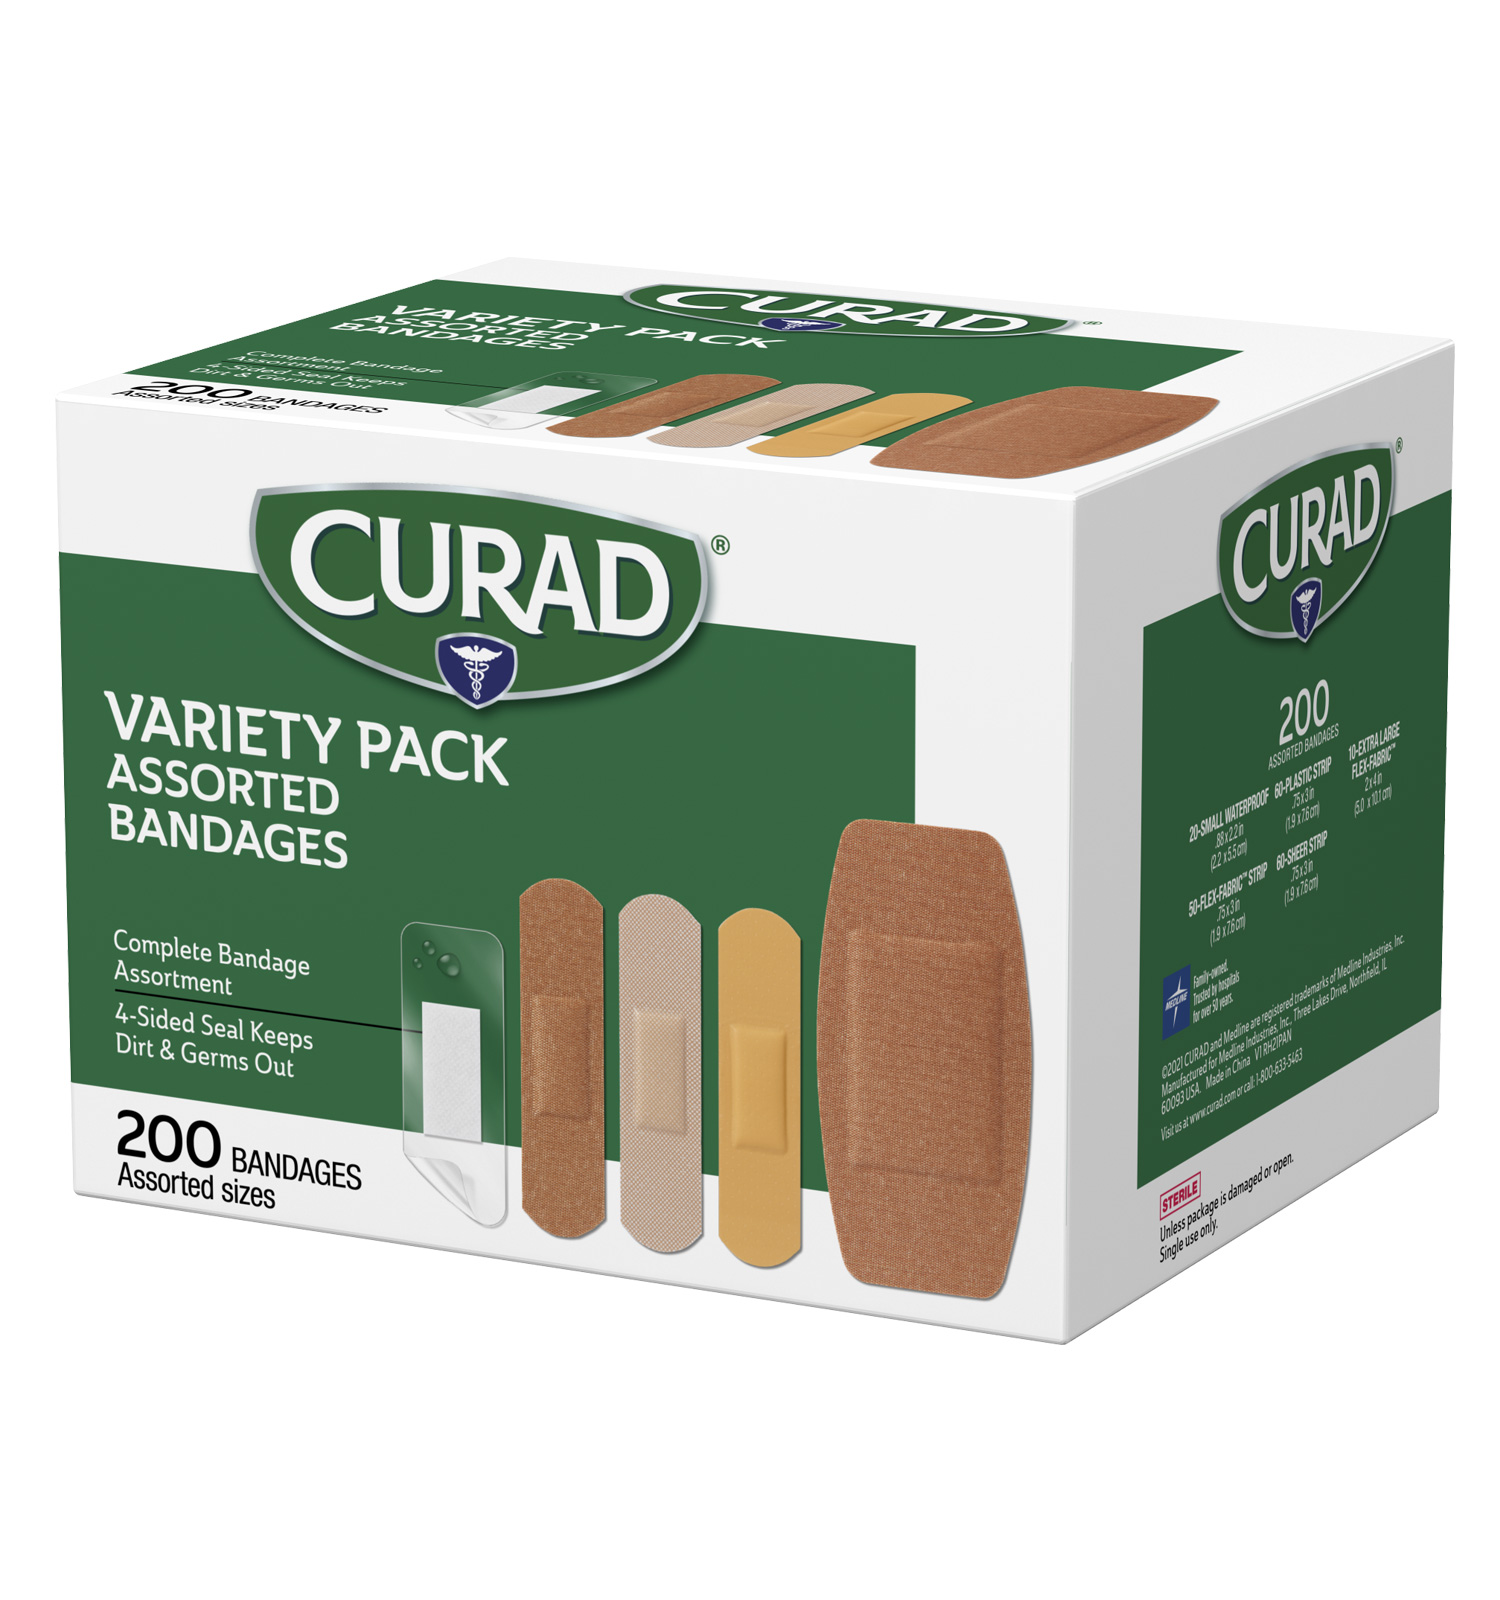 Bandage Variety Pack, Assorted Sizes, 200 count